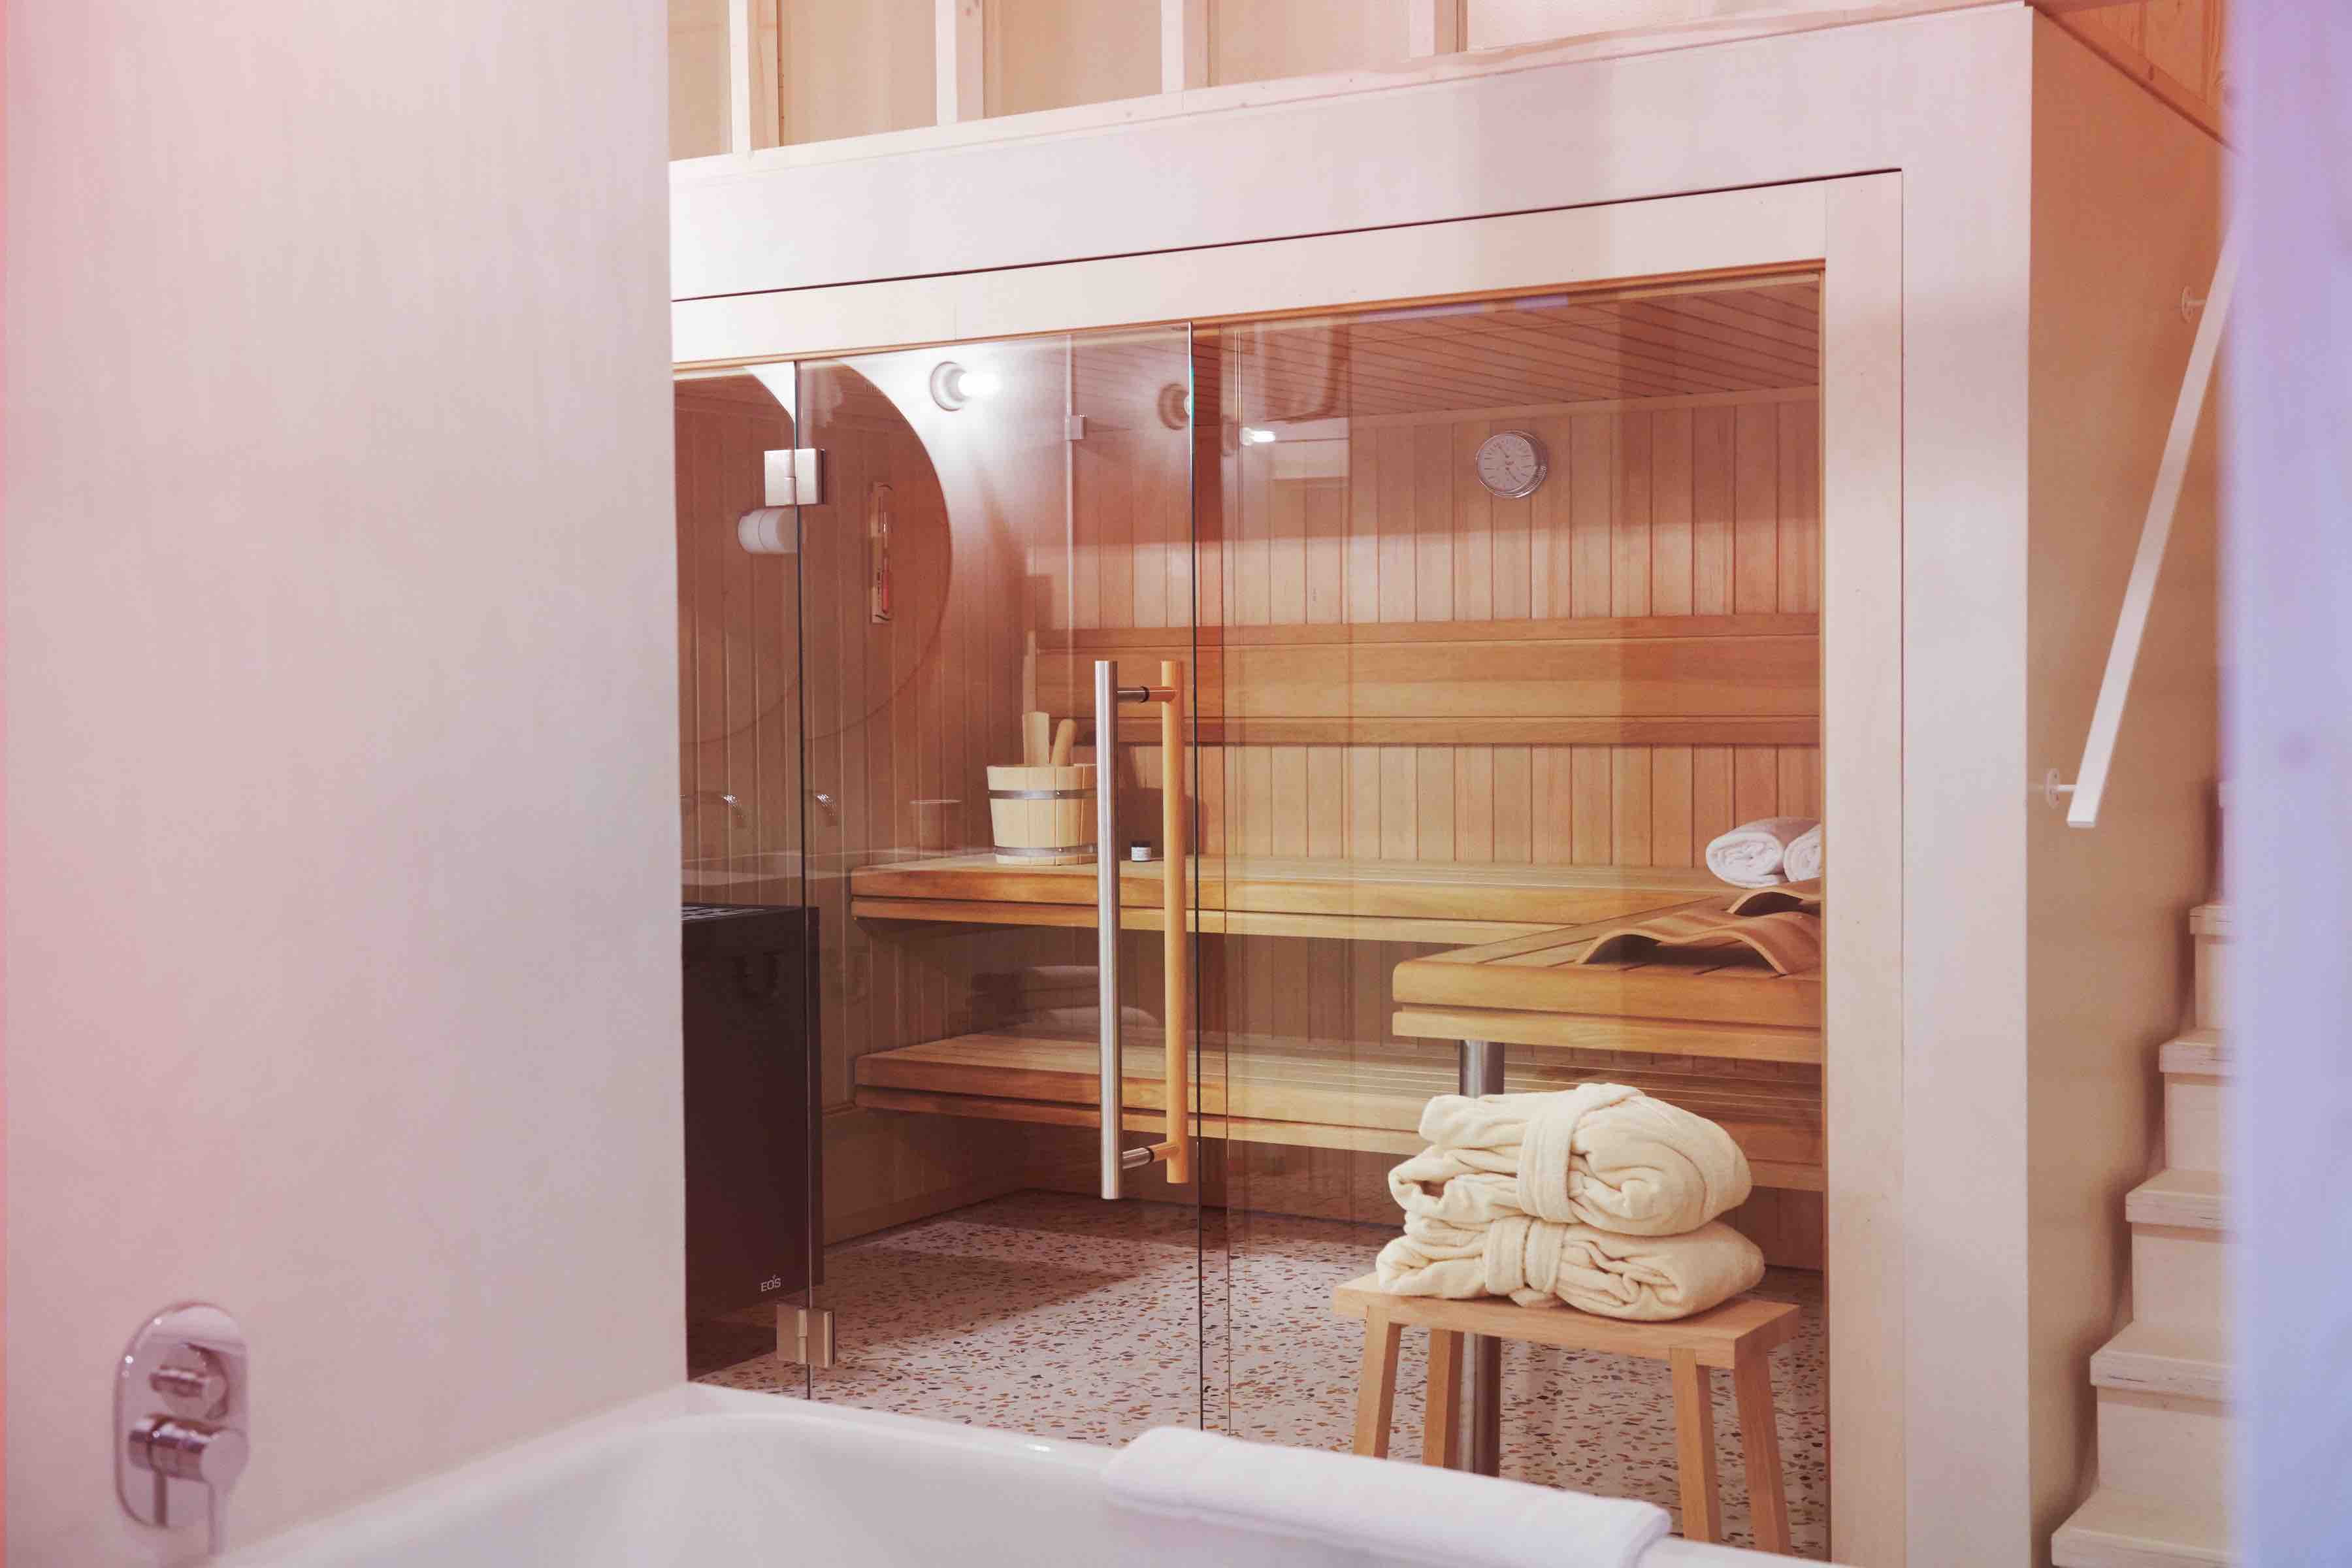 Michelberger Hotel room with built in sauna